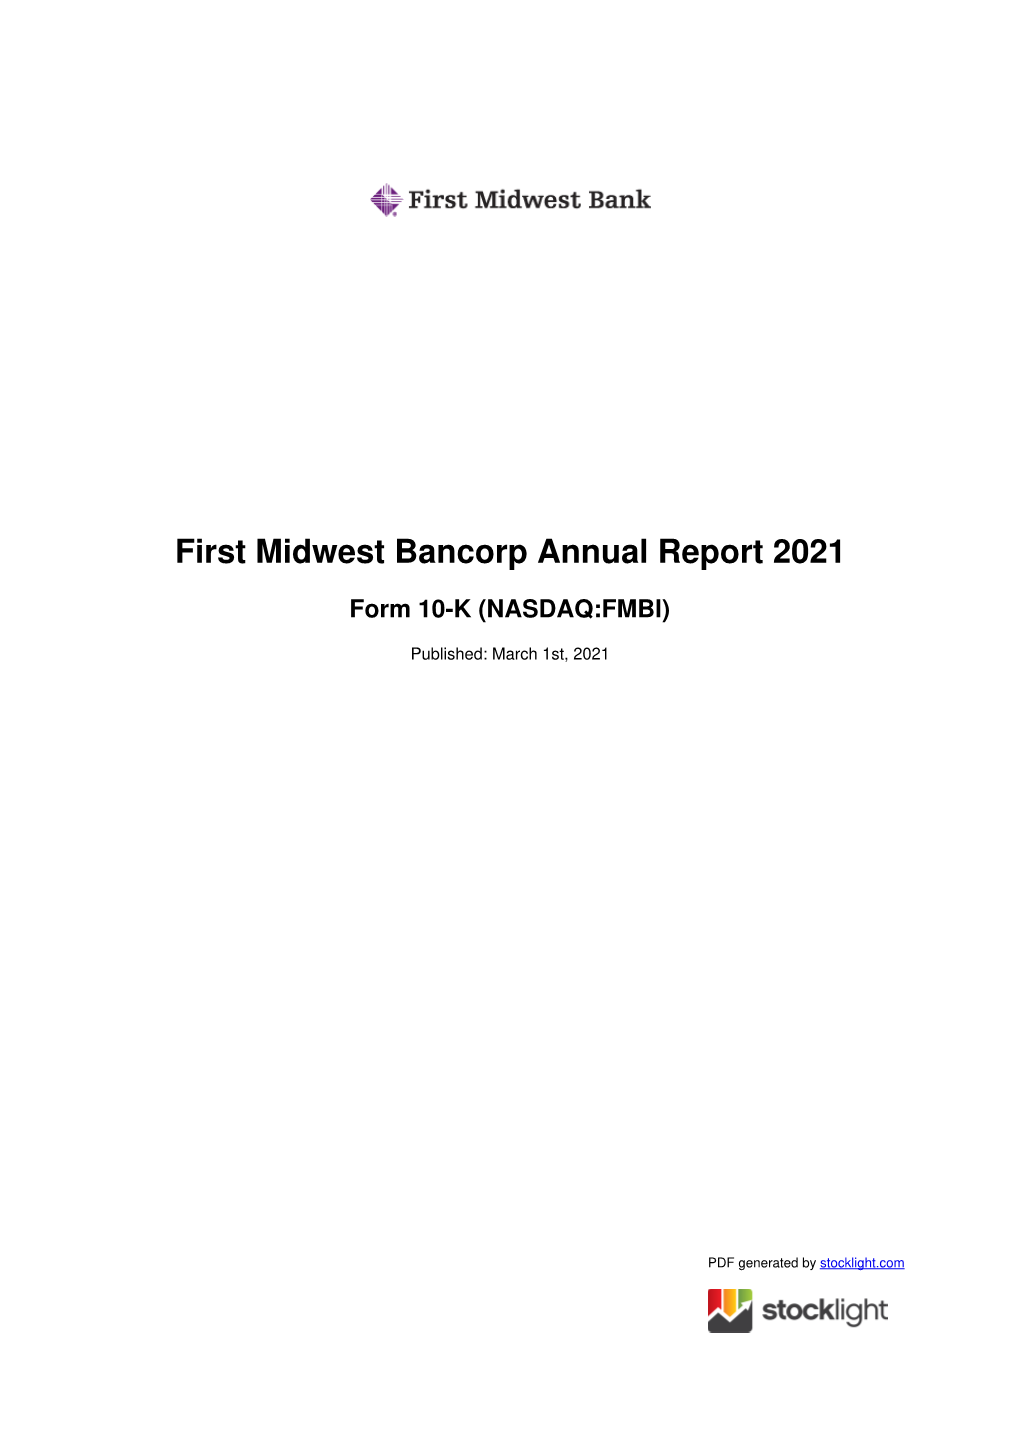 First Midwest Bancorp Annual Report 2021